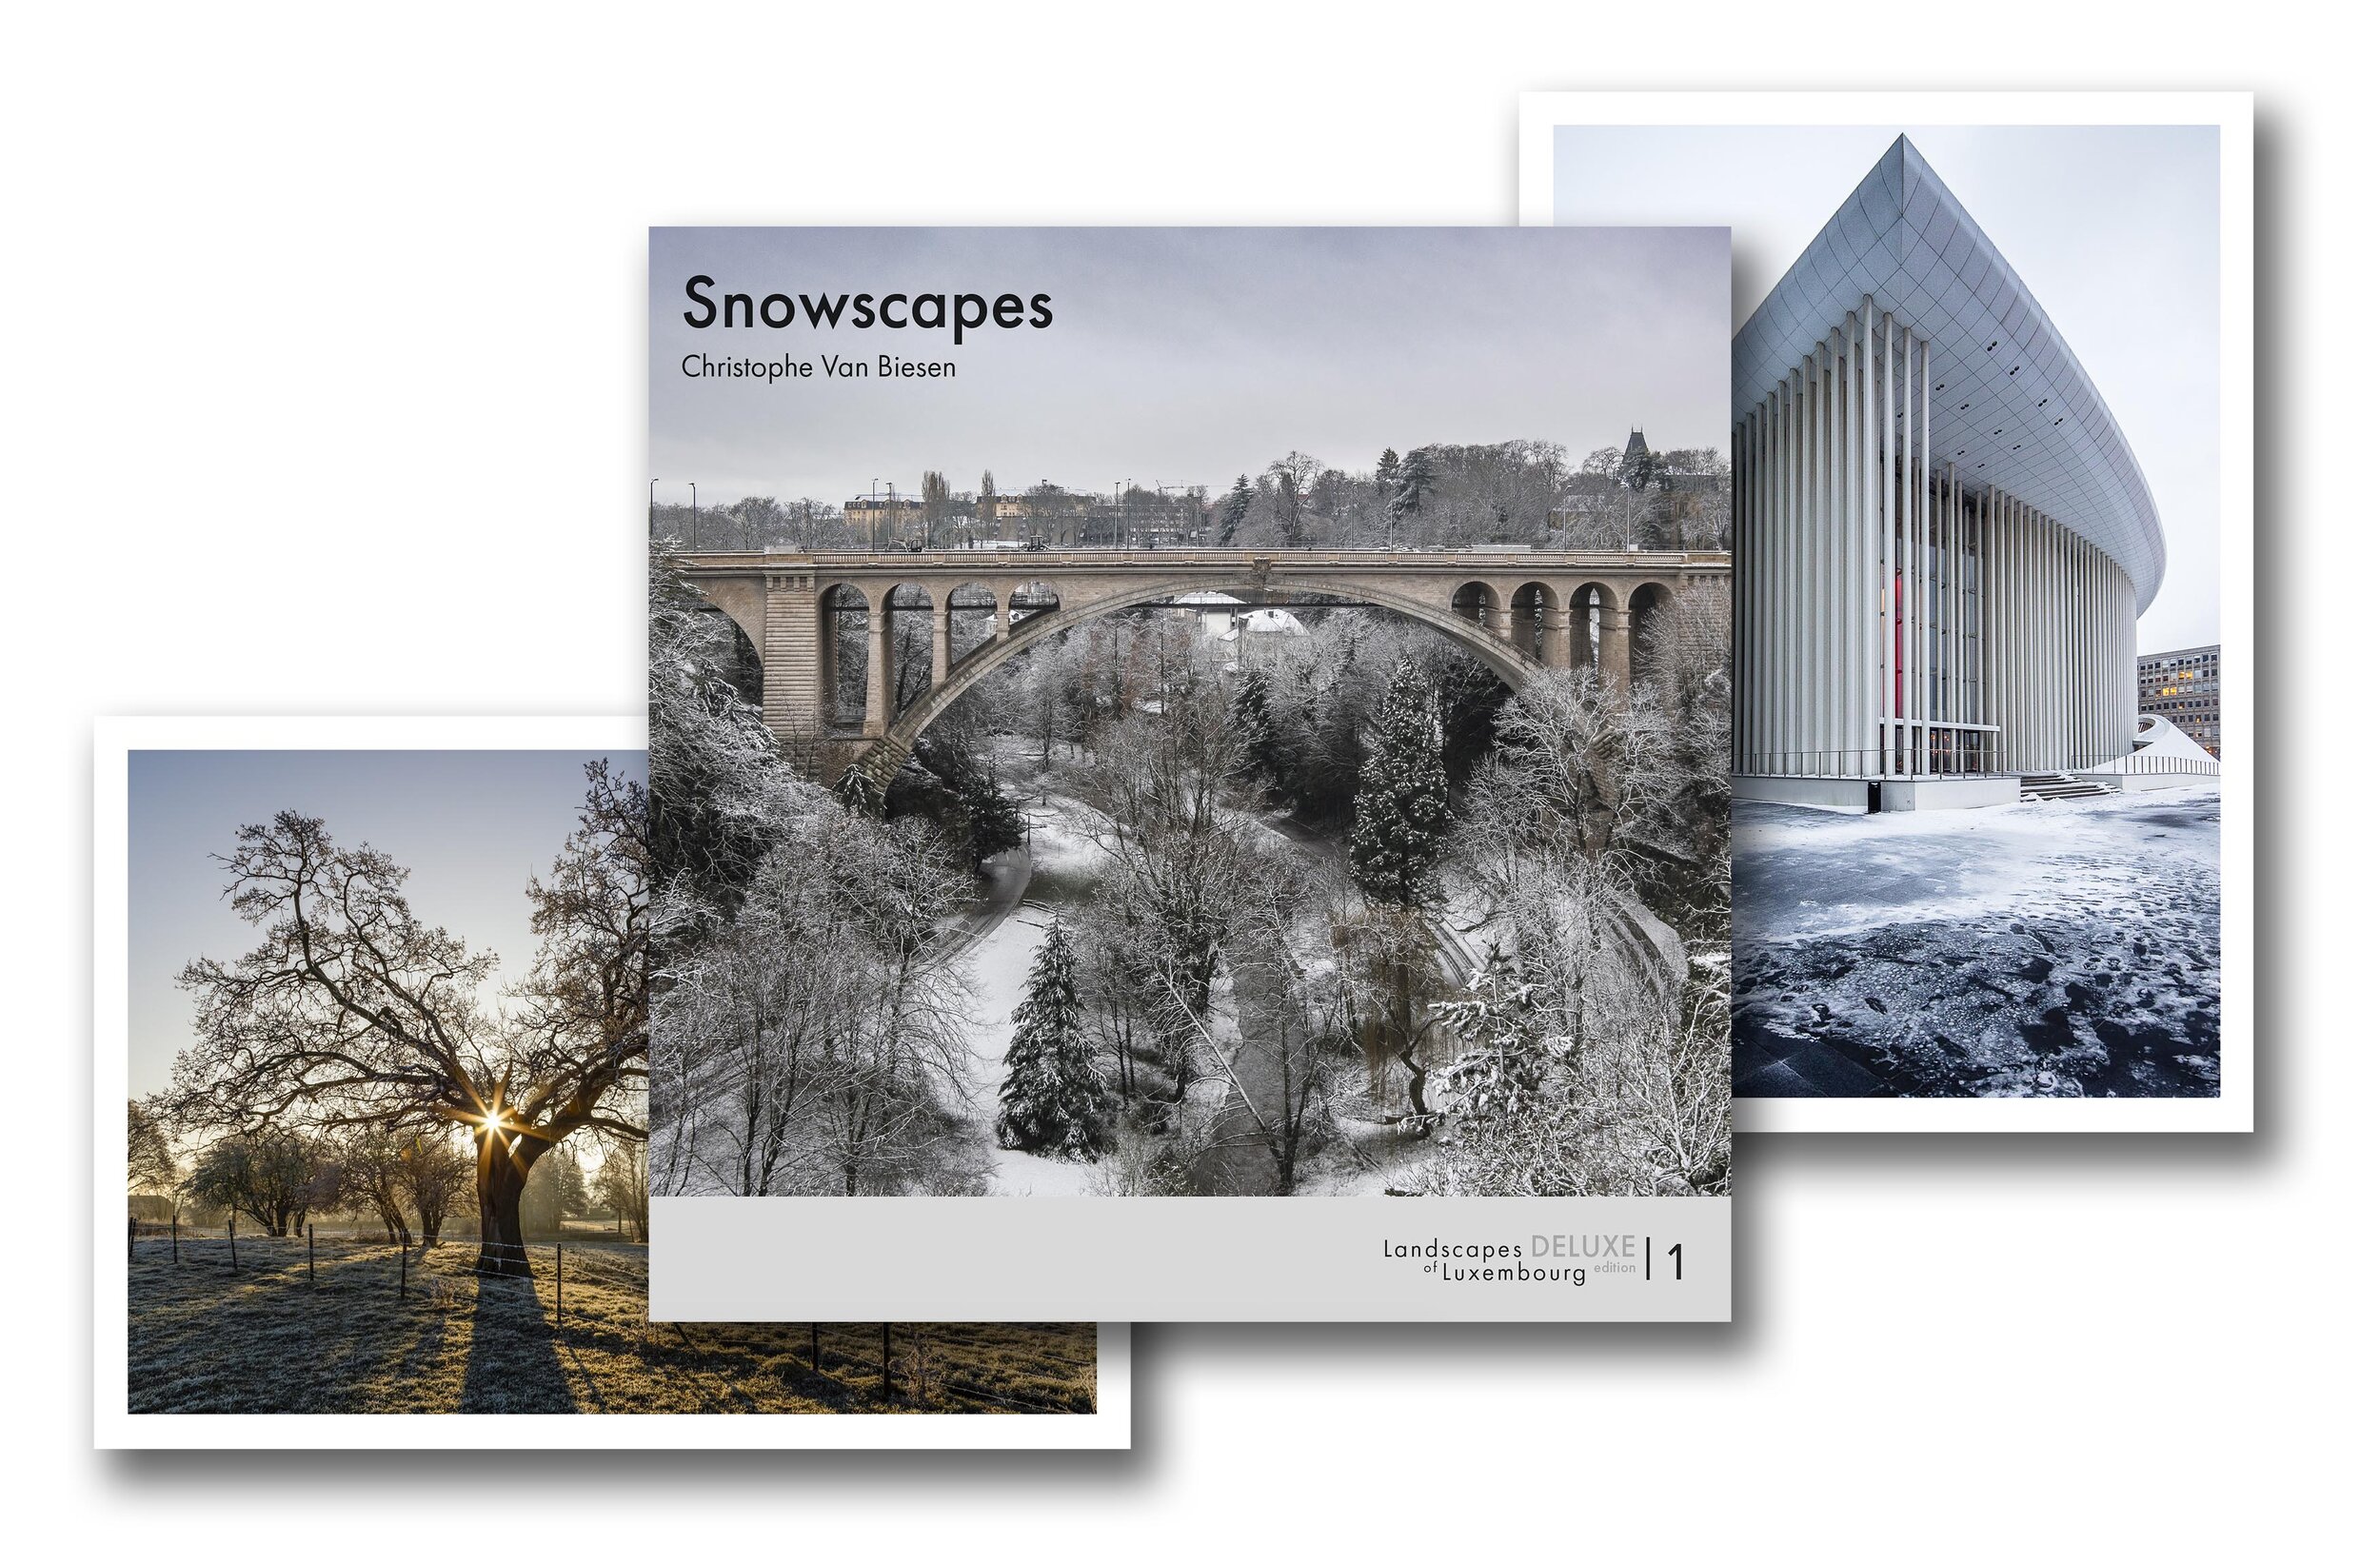 Home and Away, Landscapes by Christophe Van Biesen, The Book